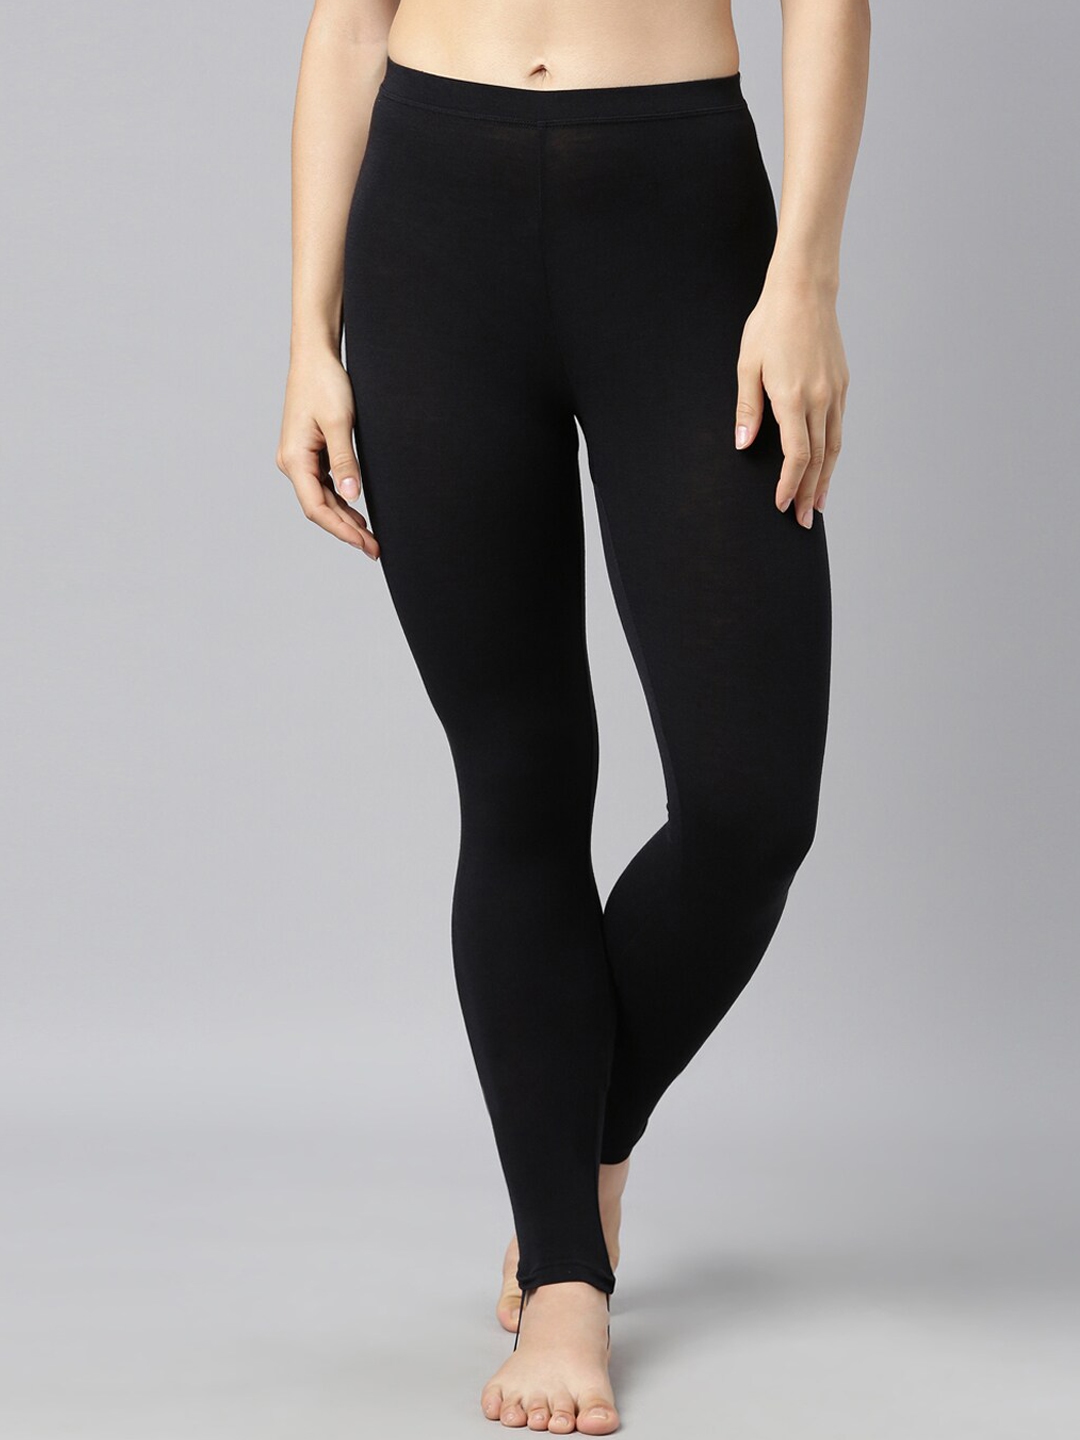 Collection more than 125 thermal leggings women best